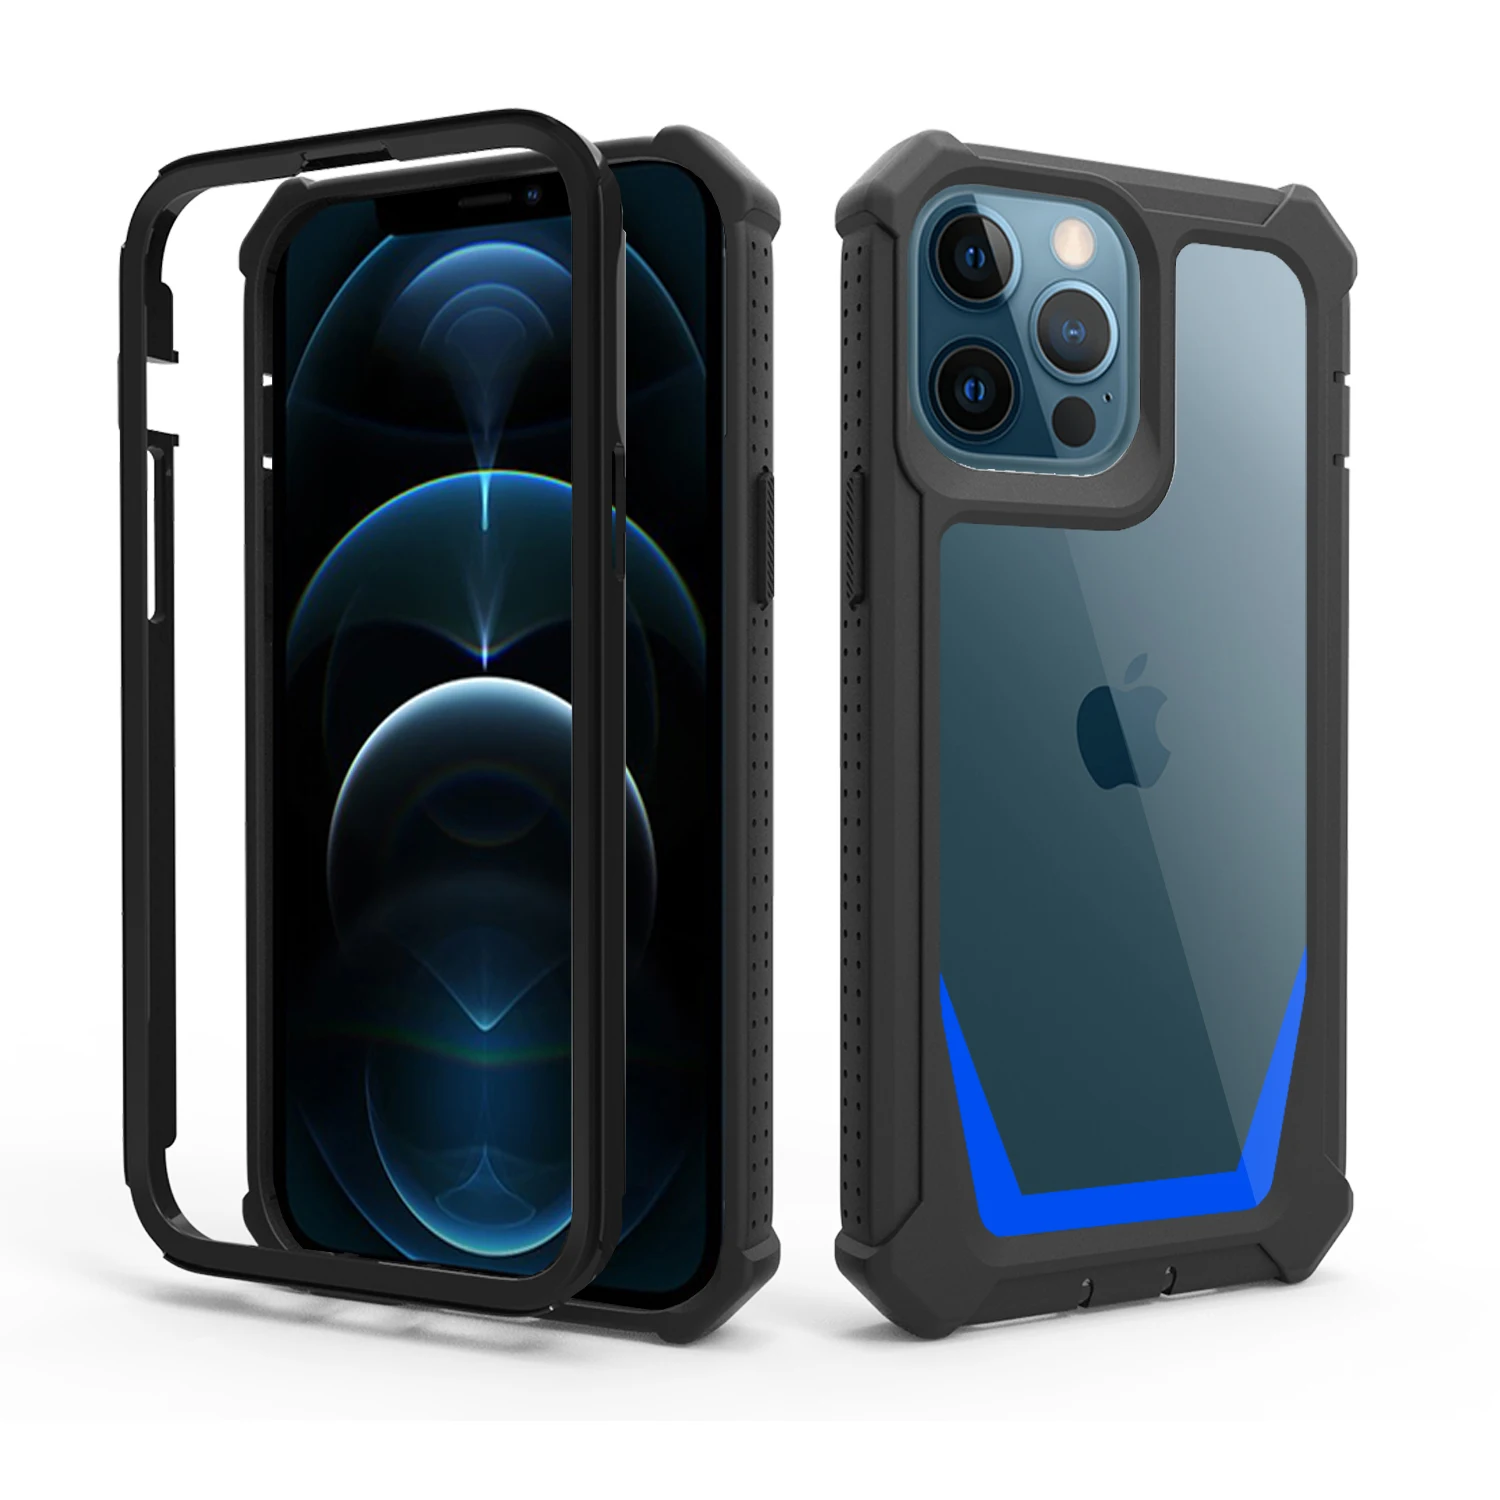 

Luxury Hybrid Shockproof Case For iPhone 13 12 Pro Heavy Duty Armor Case For iPhone 11 X XS Max XR 8 7 Plus Hard Silicone Cover